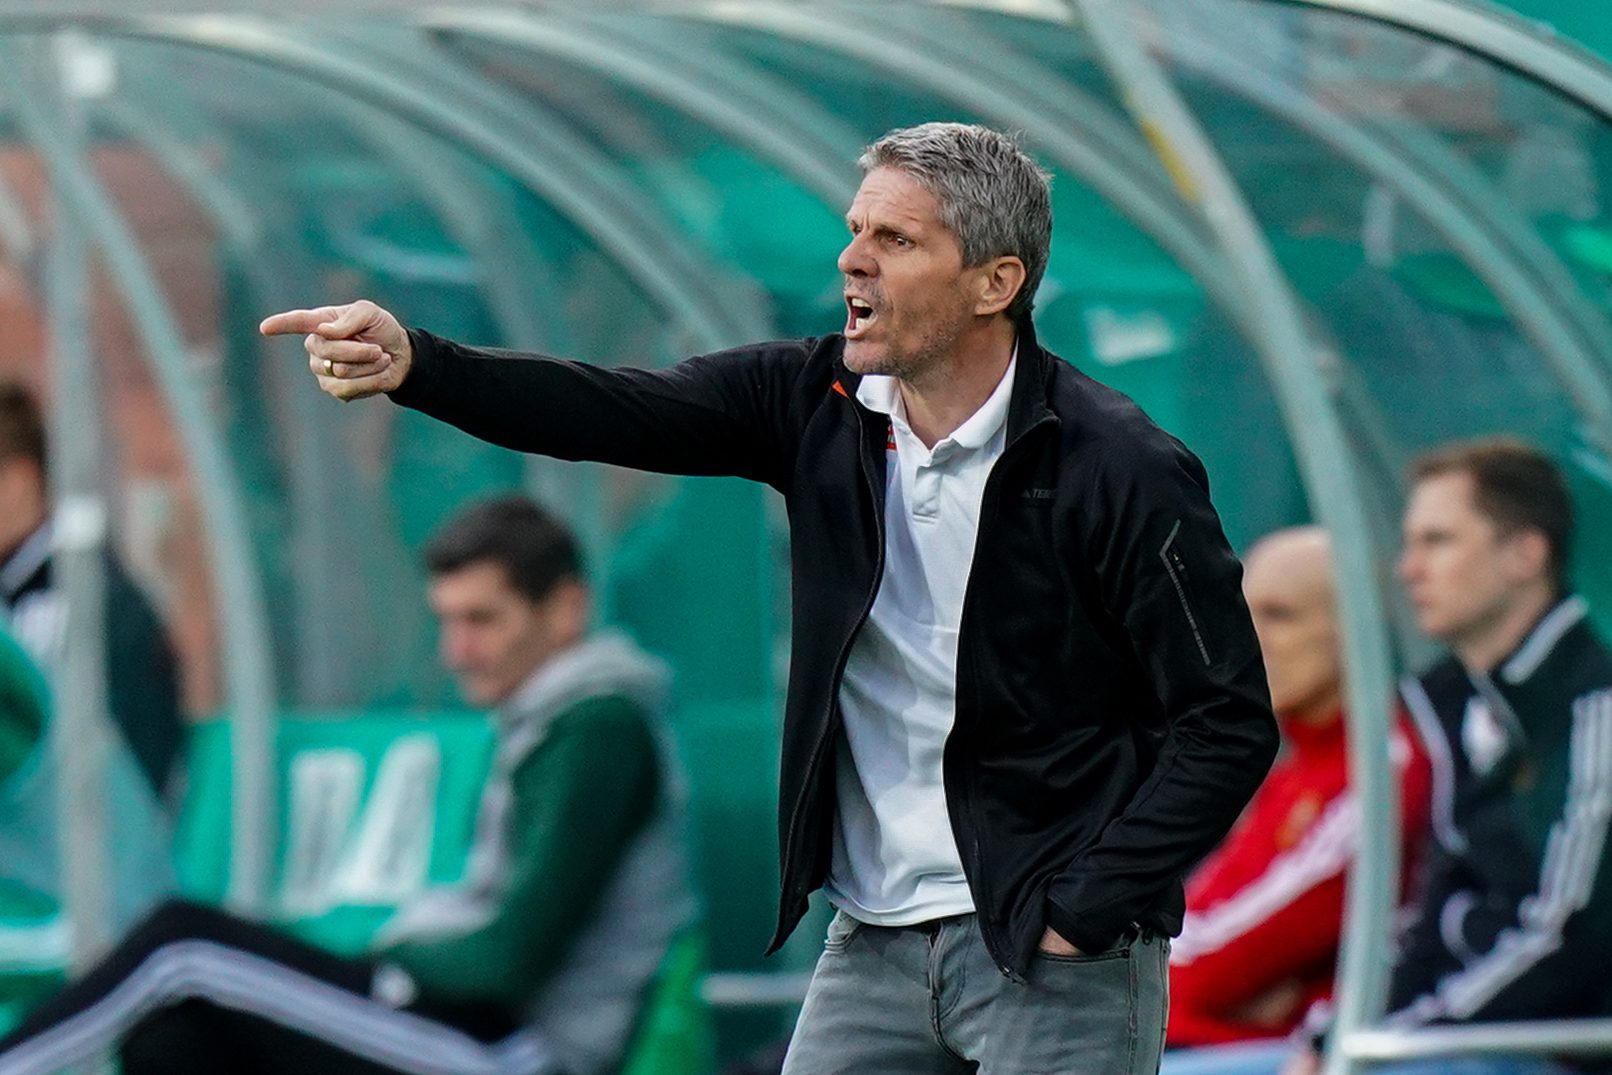 VIENNA,AUSTRIA,11.APR.21 - SOCCER - tipico Bundesliga, championship group, SK Rapid Wien vs Red Bull Salzburg. Image shows the disappointment of head coach Dietmar Kuehbauer (Rapid).